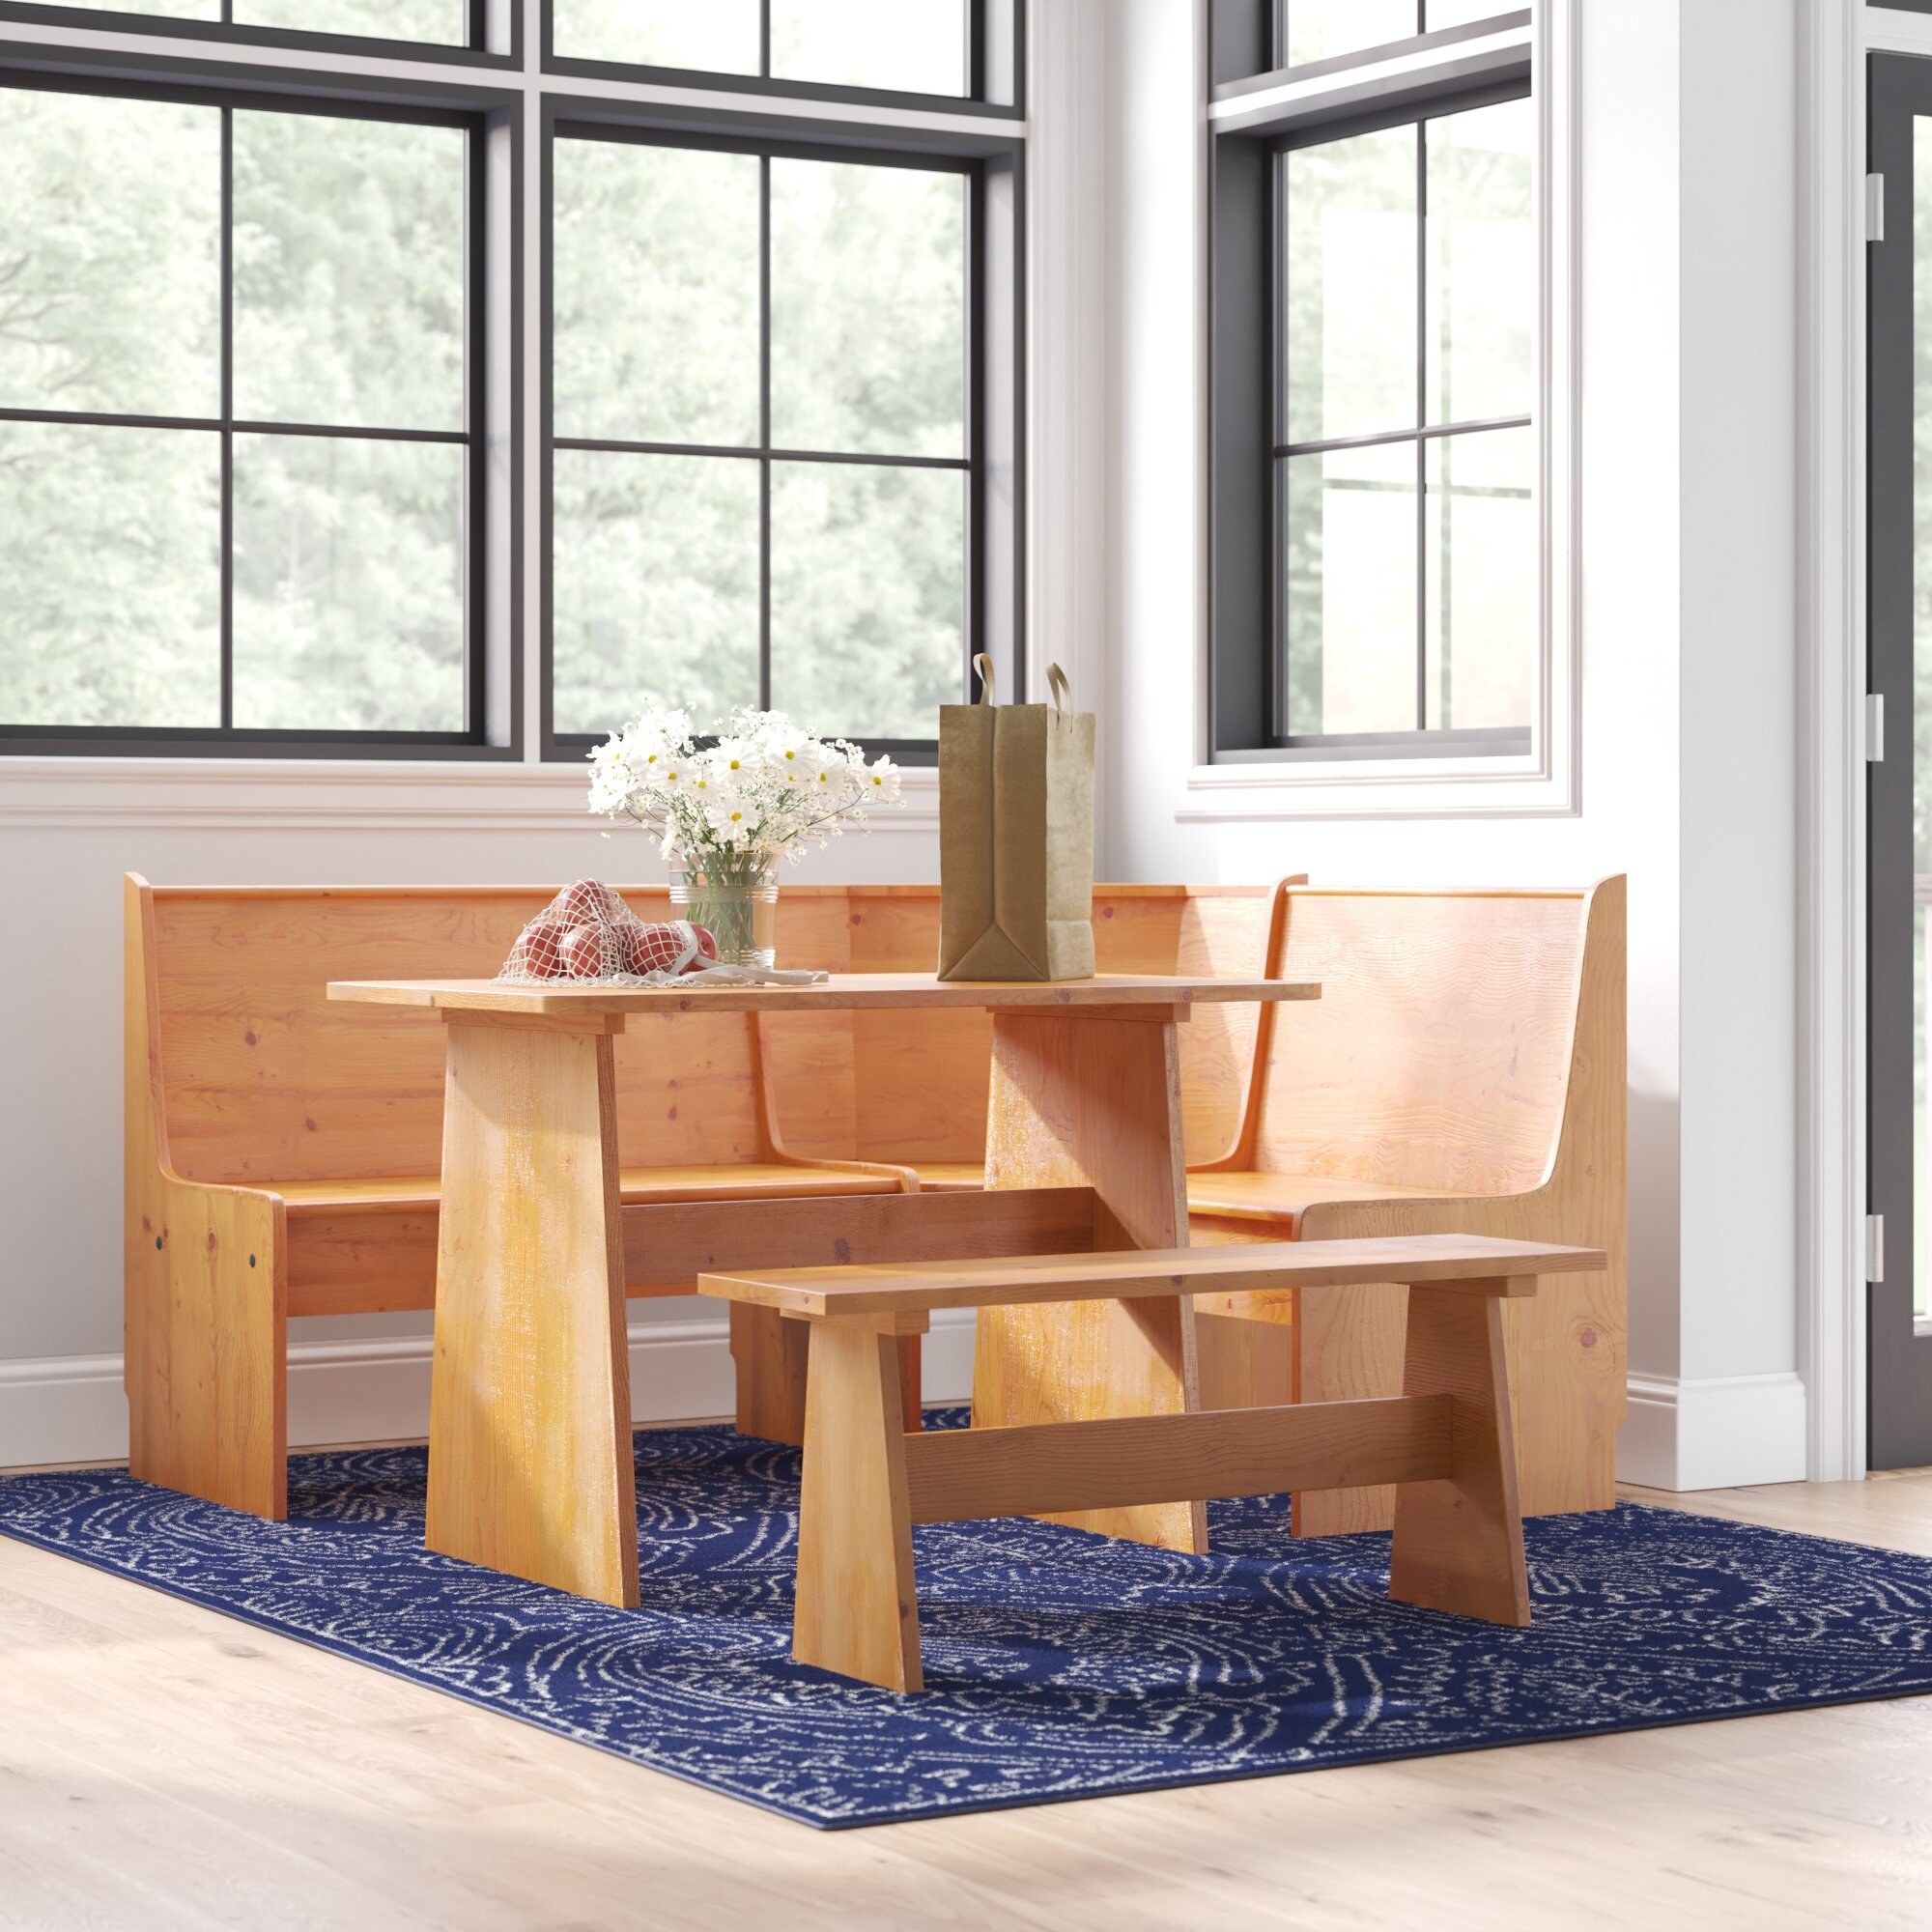 A light wood table with a bench and three connected chairs that wrap around.